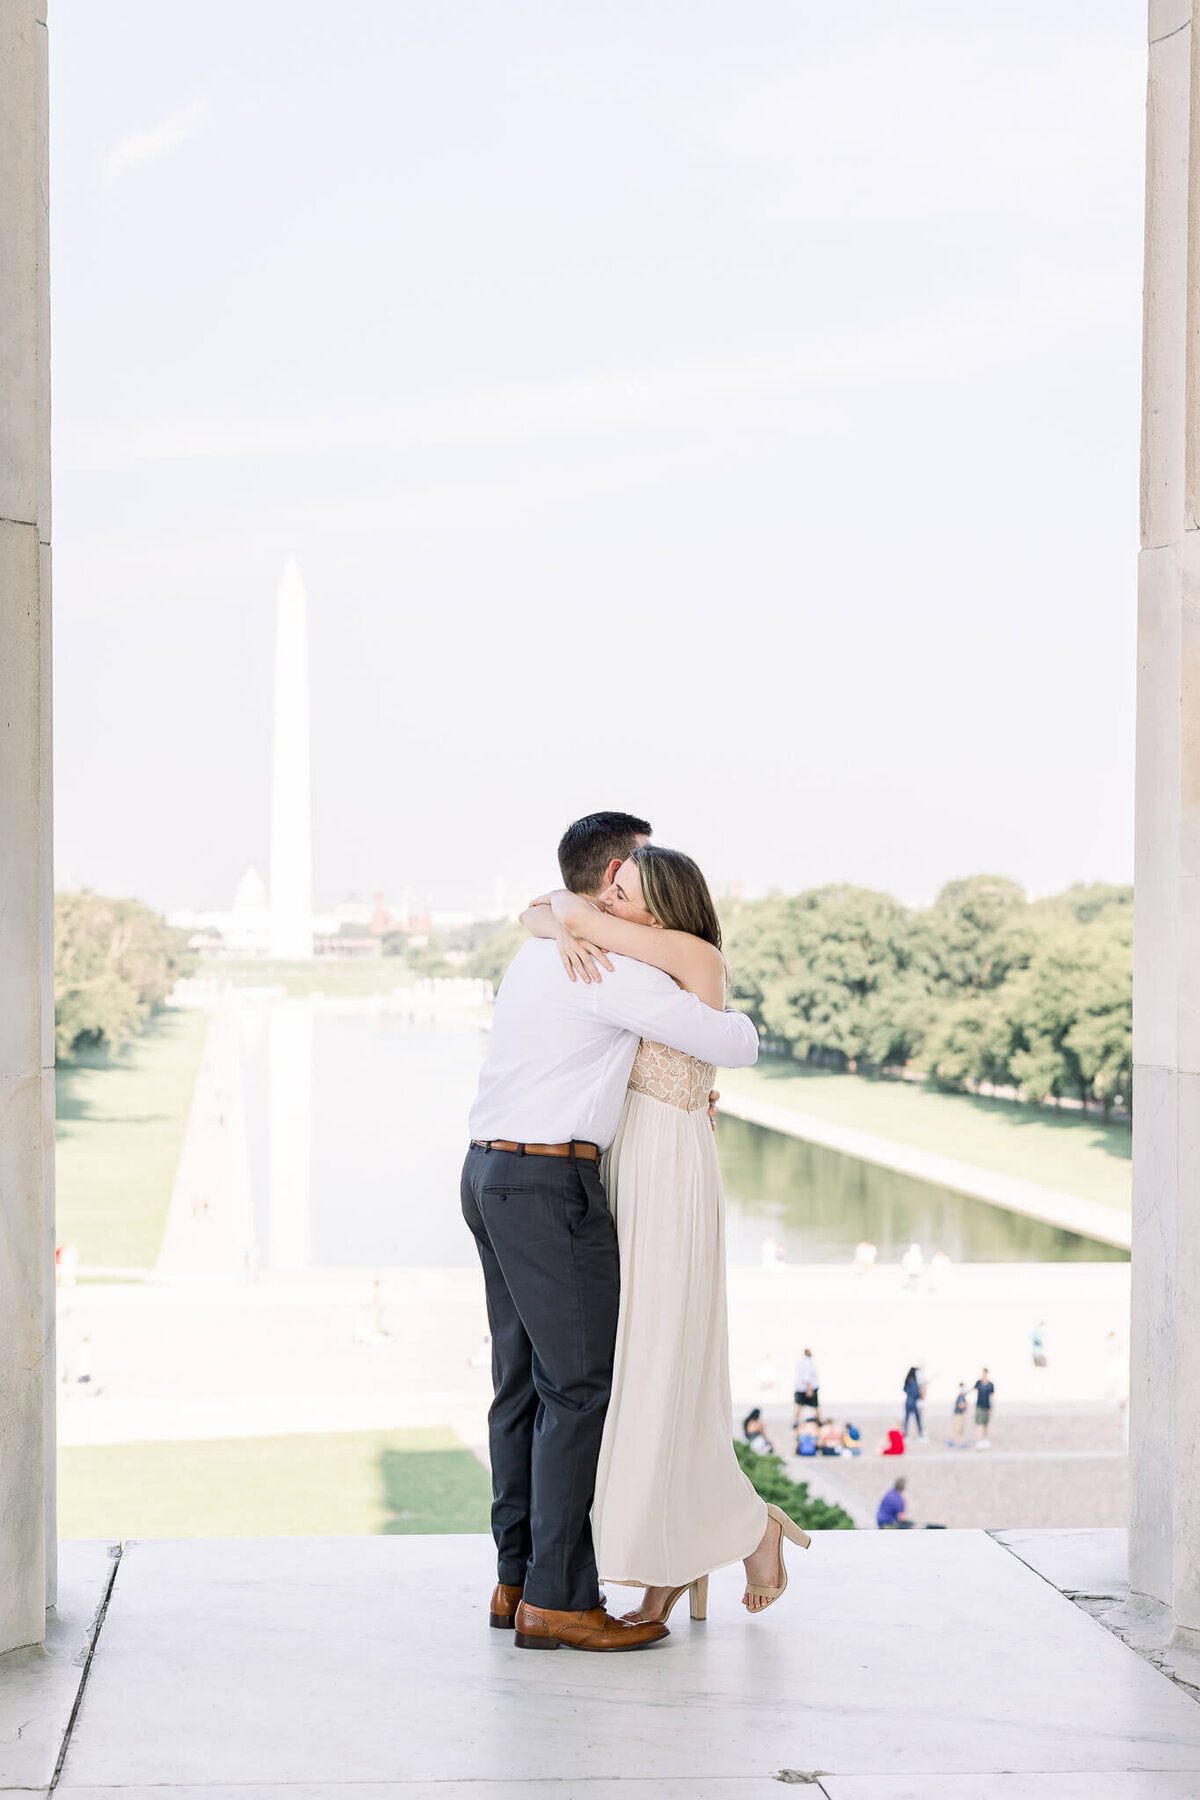 engagement-lincoln-memorial-proposal-photography-washington-DC-virginia-maryland-modern-light-and-airy-classic-timeless-romantic-12